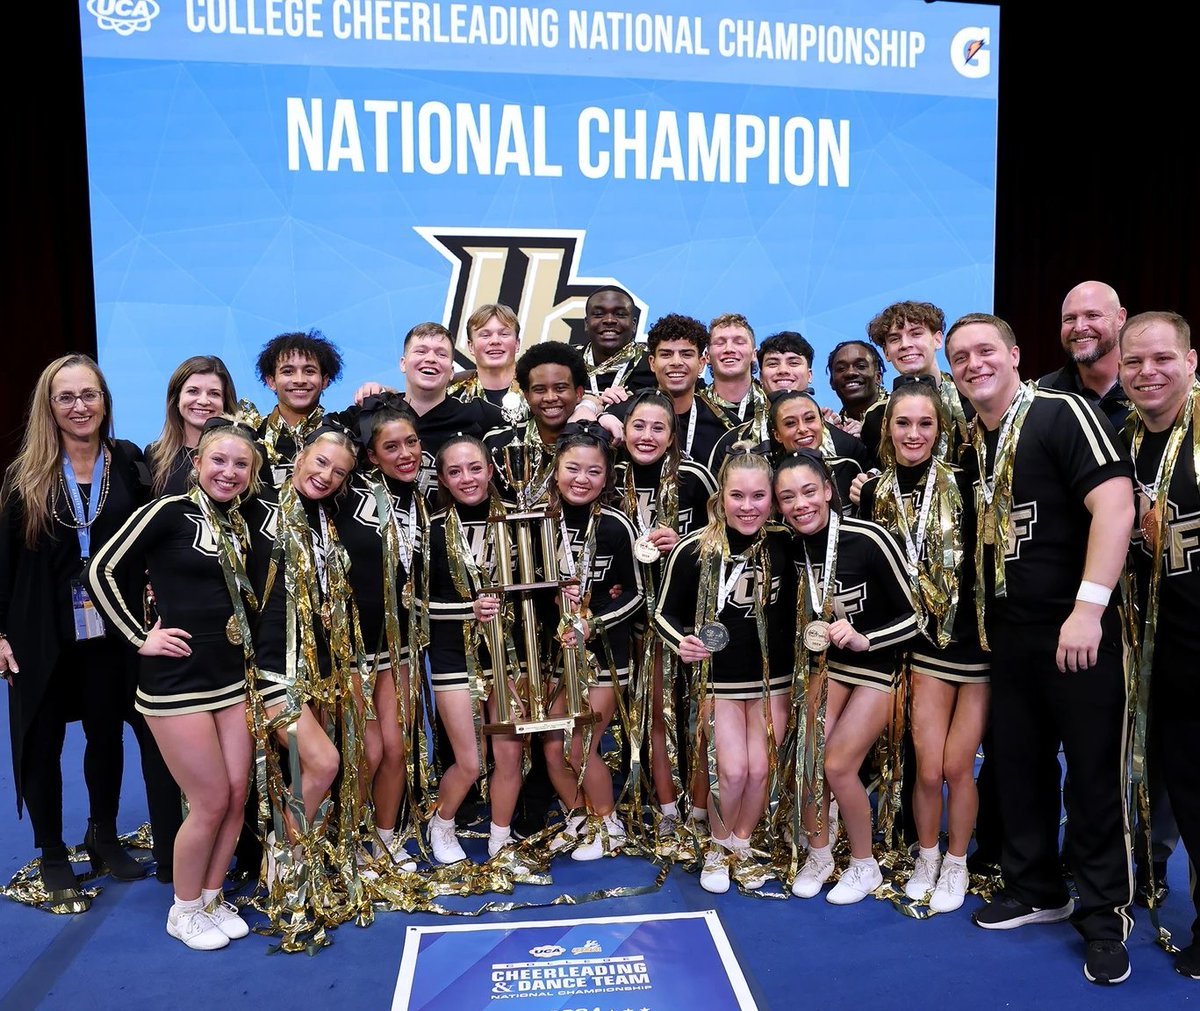 Congratulations, @UCF_CheerTeam! Knight Nation is so proud of you for claiming your fourth national title in the Division 1A Coed Cheer National Championship. #ChargeOn